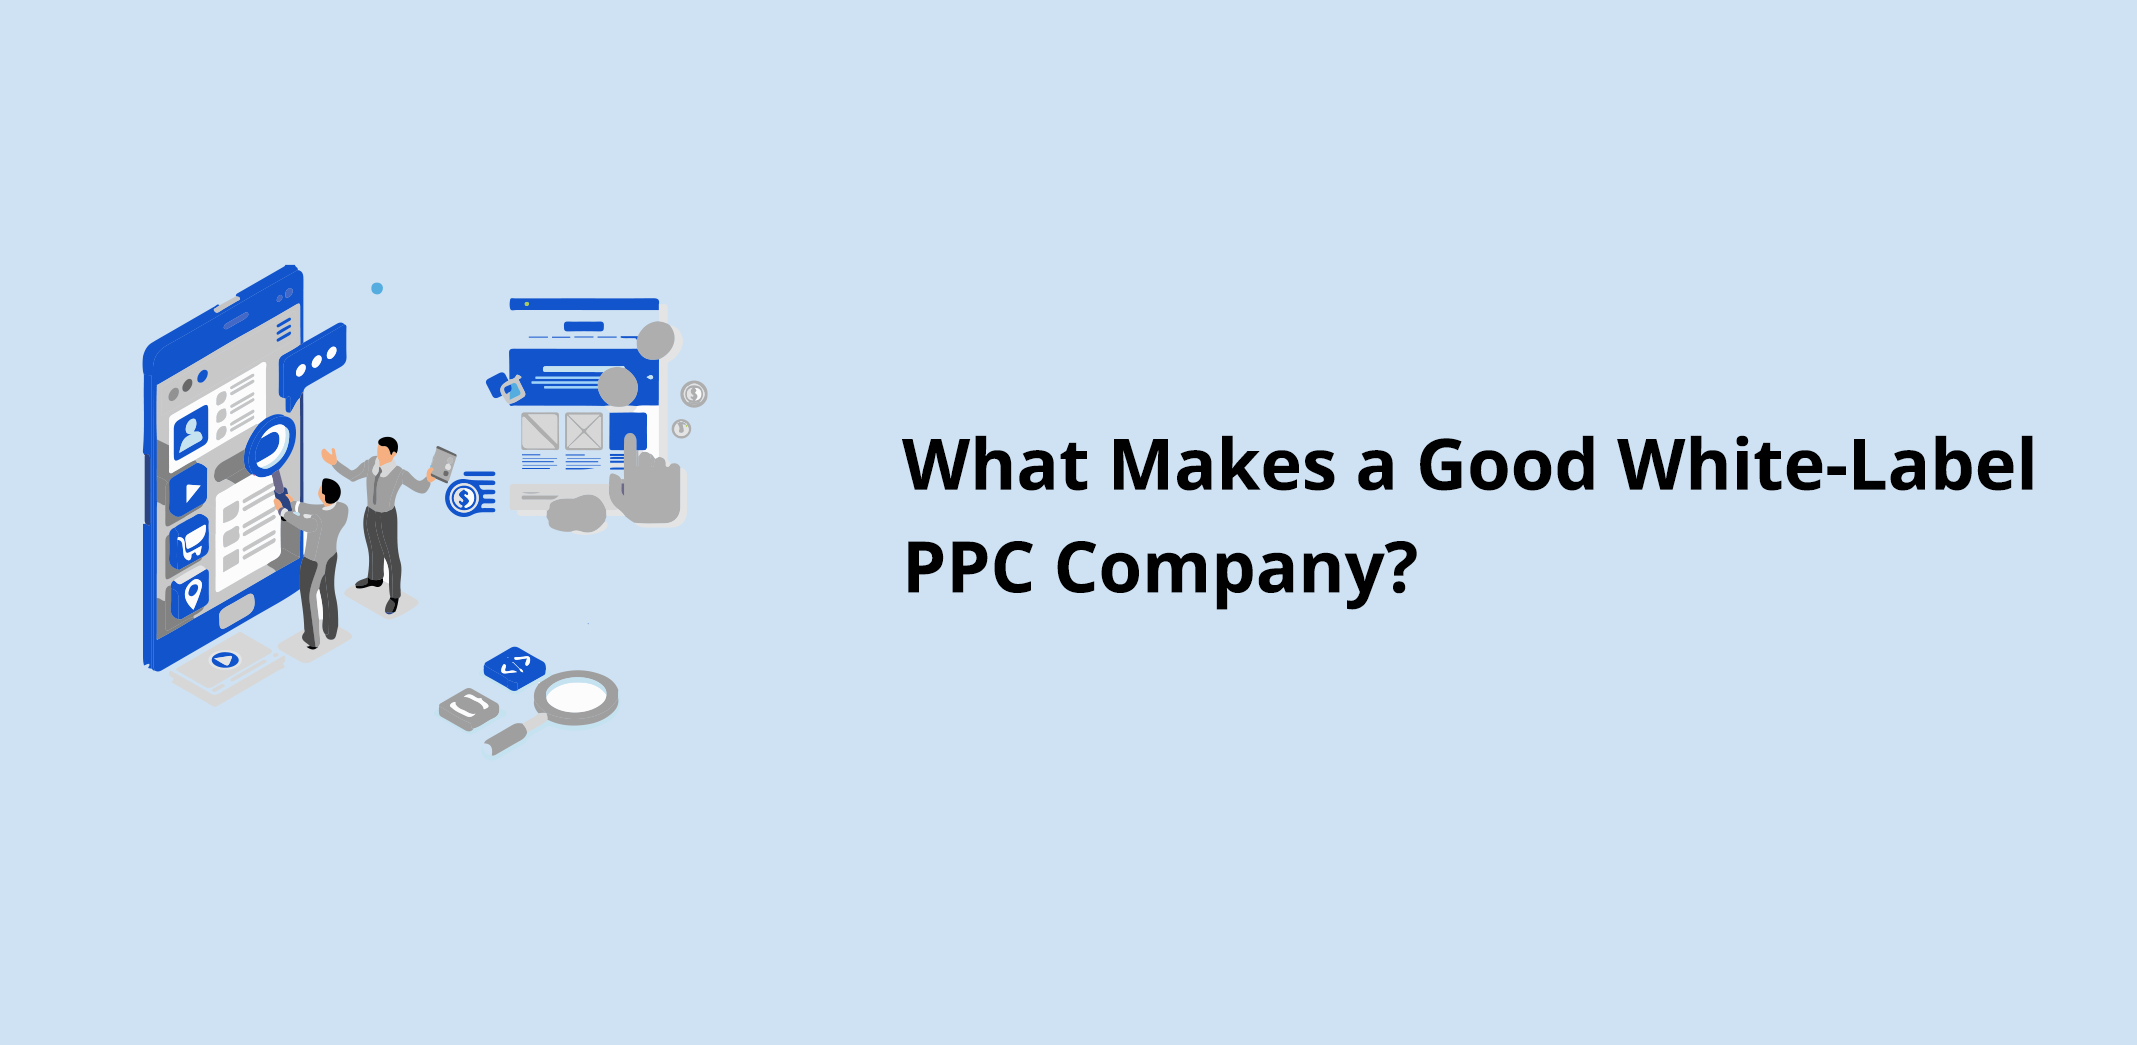 What Makes a Good White-Label PPC Company?